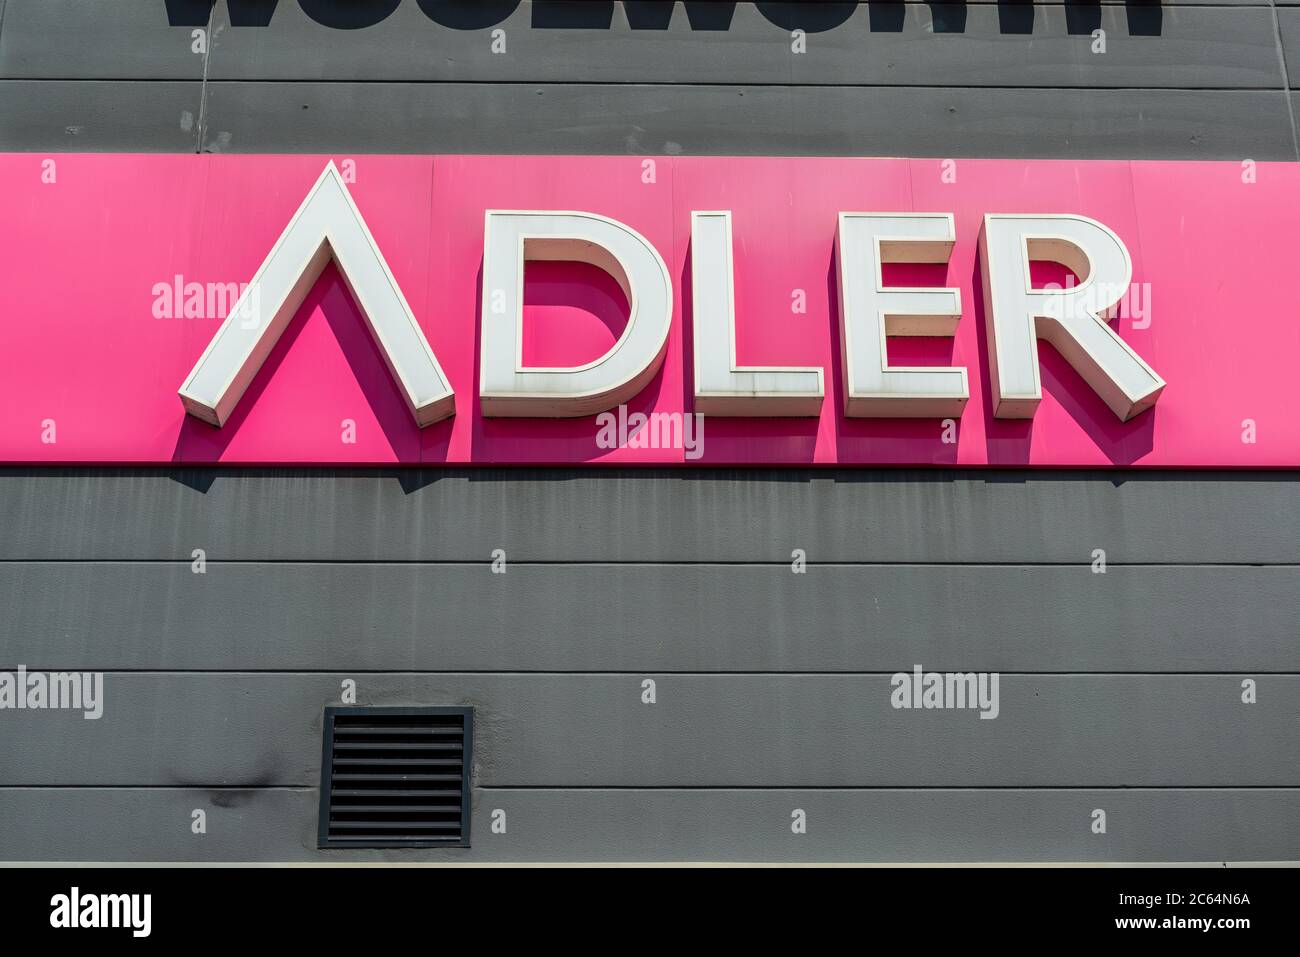 Adler modemarkte hi-res stock photography and images - Alamy